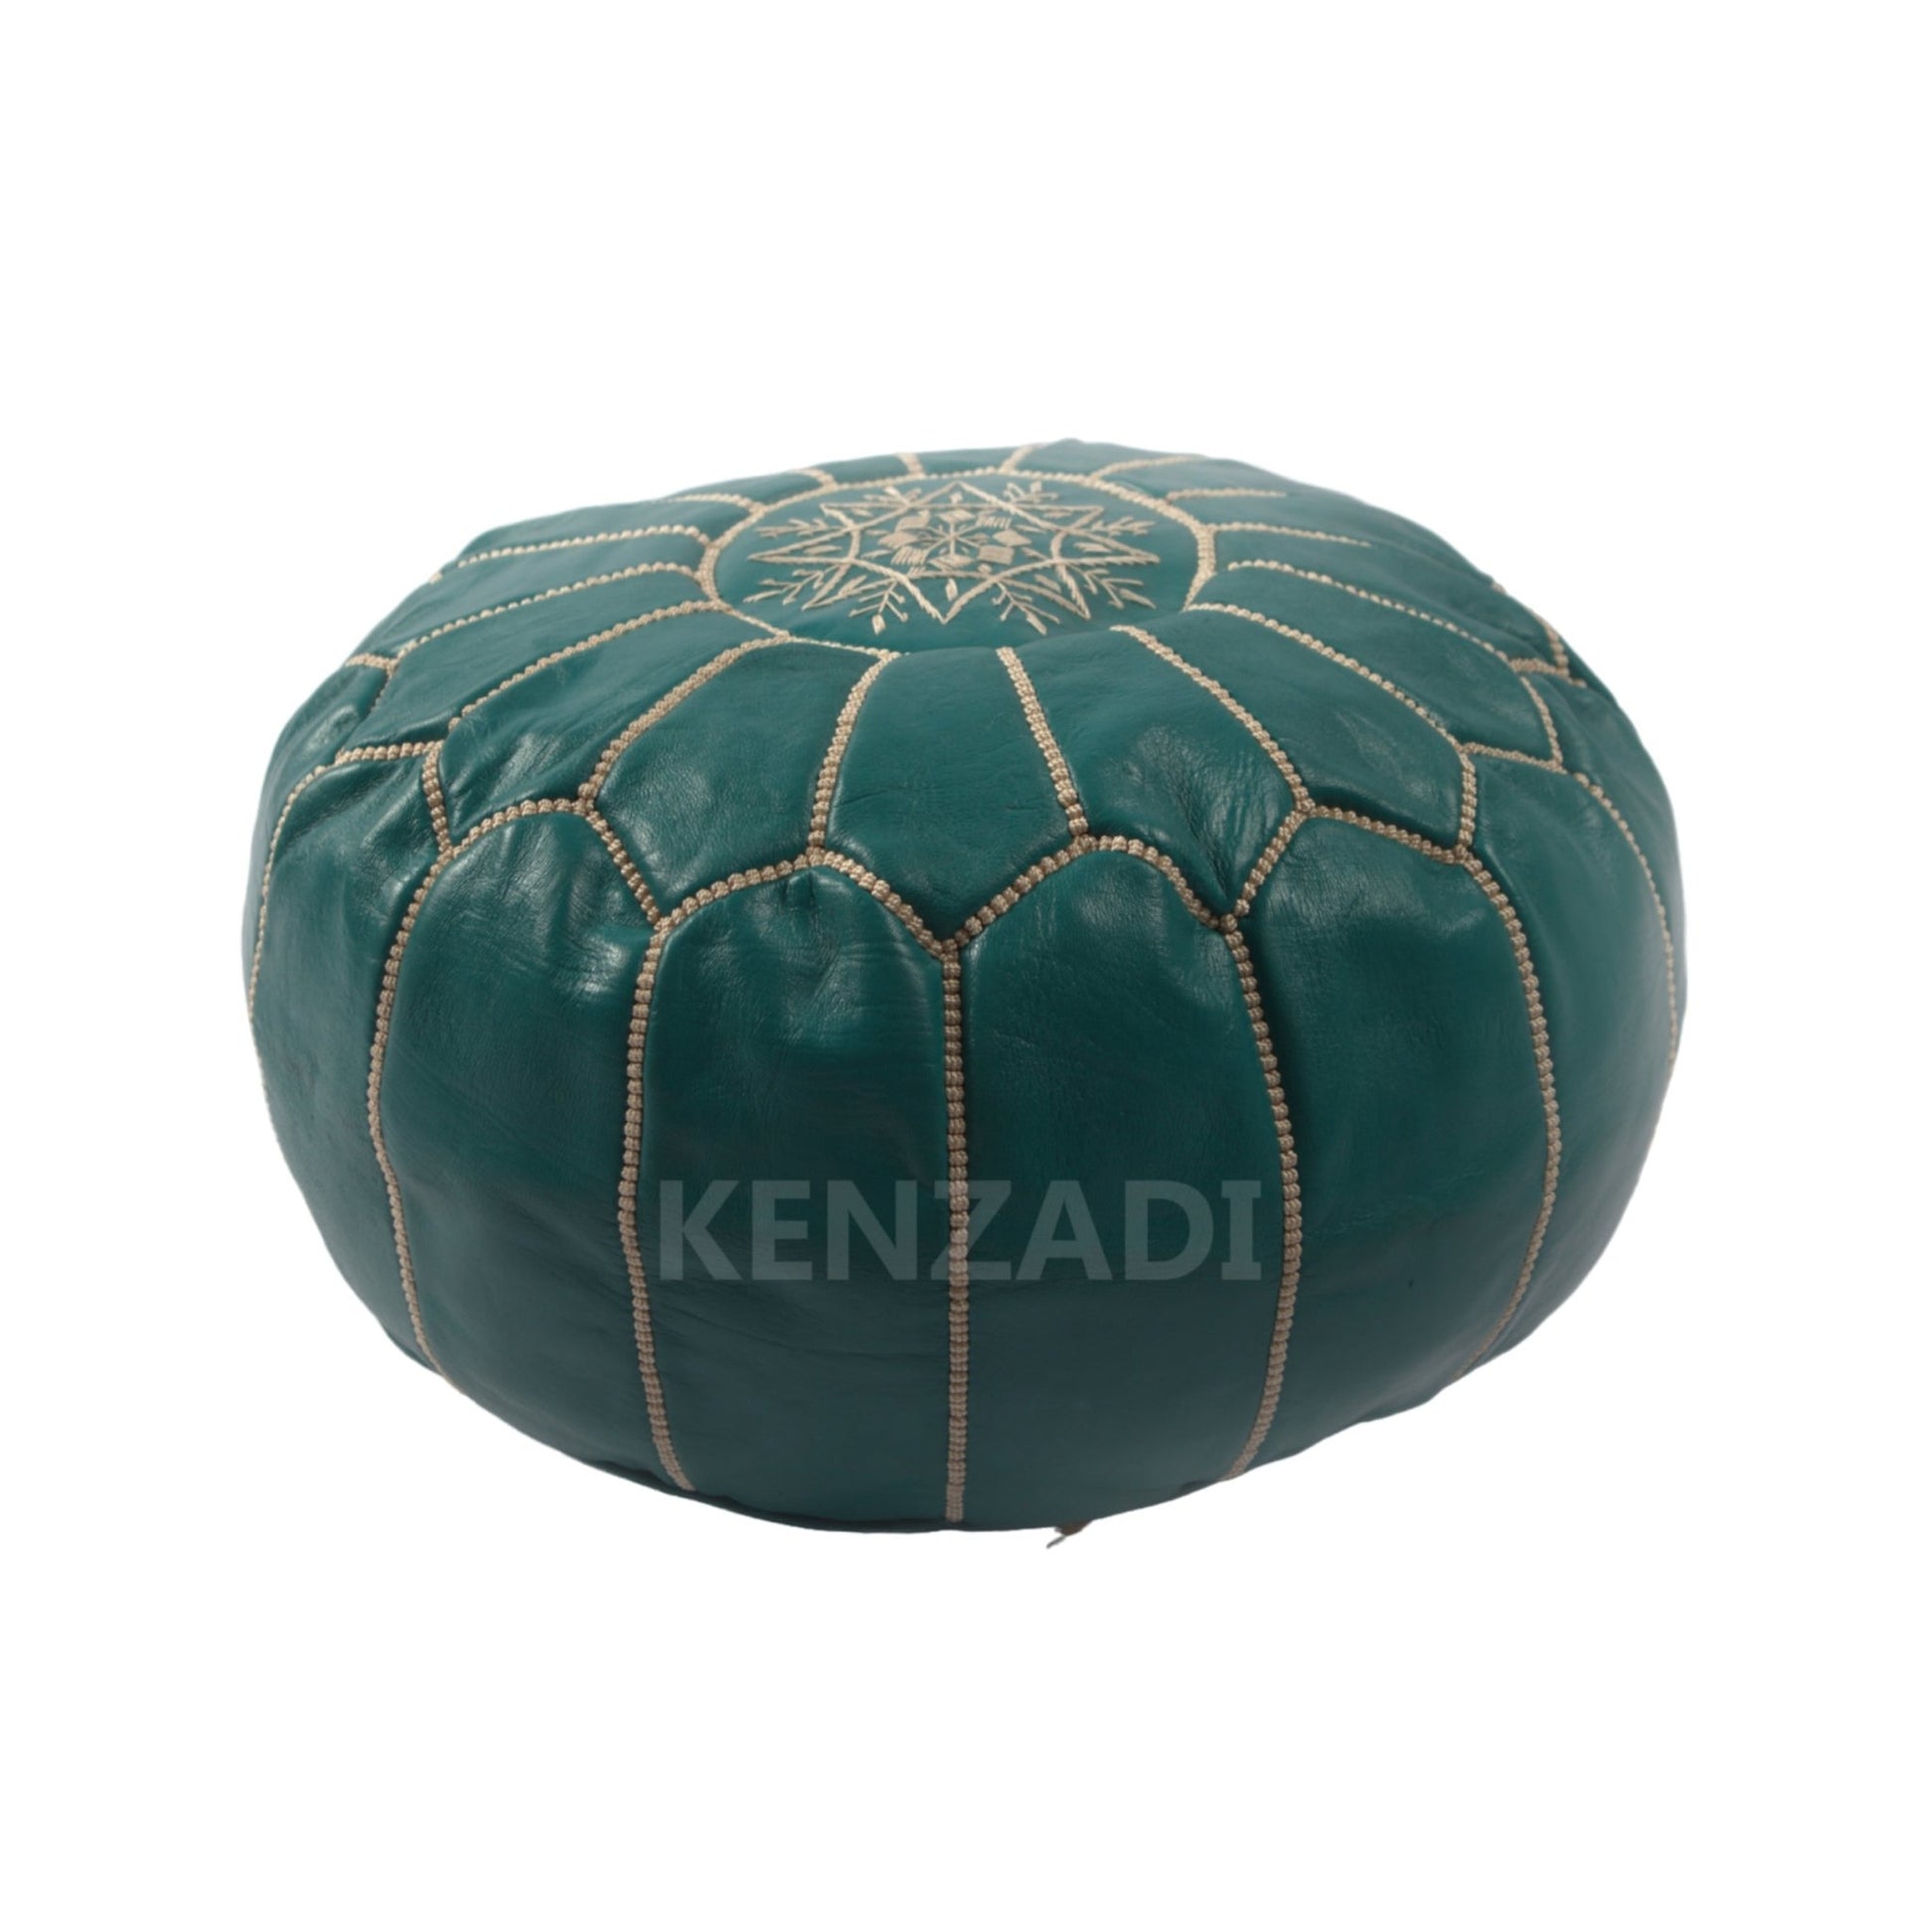 Moroccan leather pouf, round pouf, berber pouf, Turquoise pouf with Beige embroidery by Kenzadi - Handmade by My Poufs